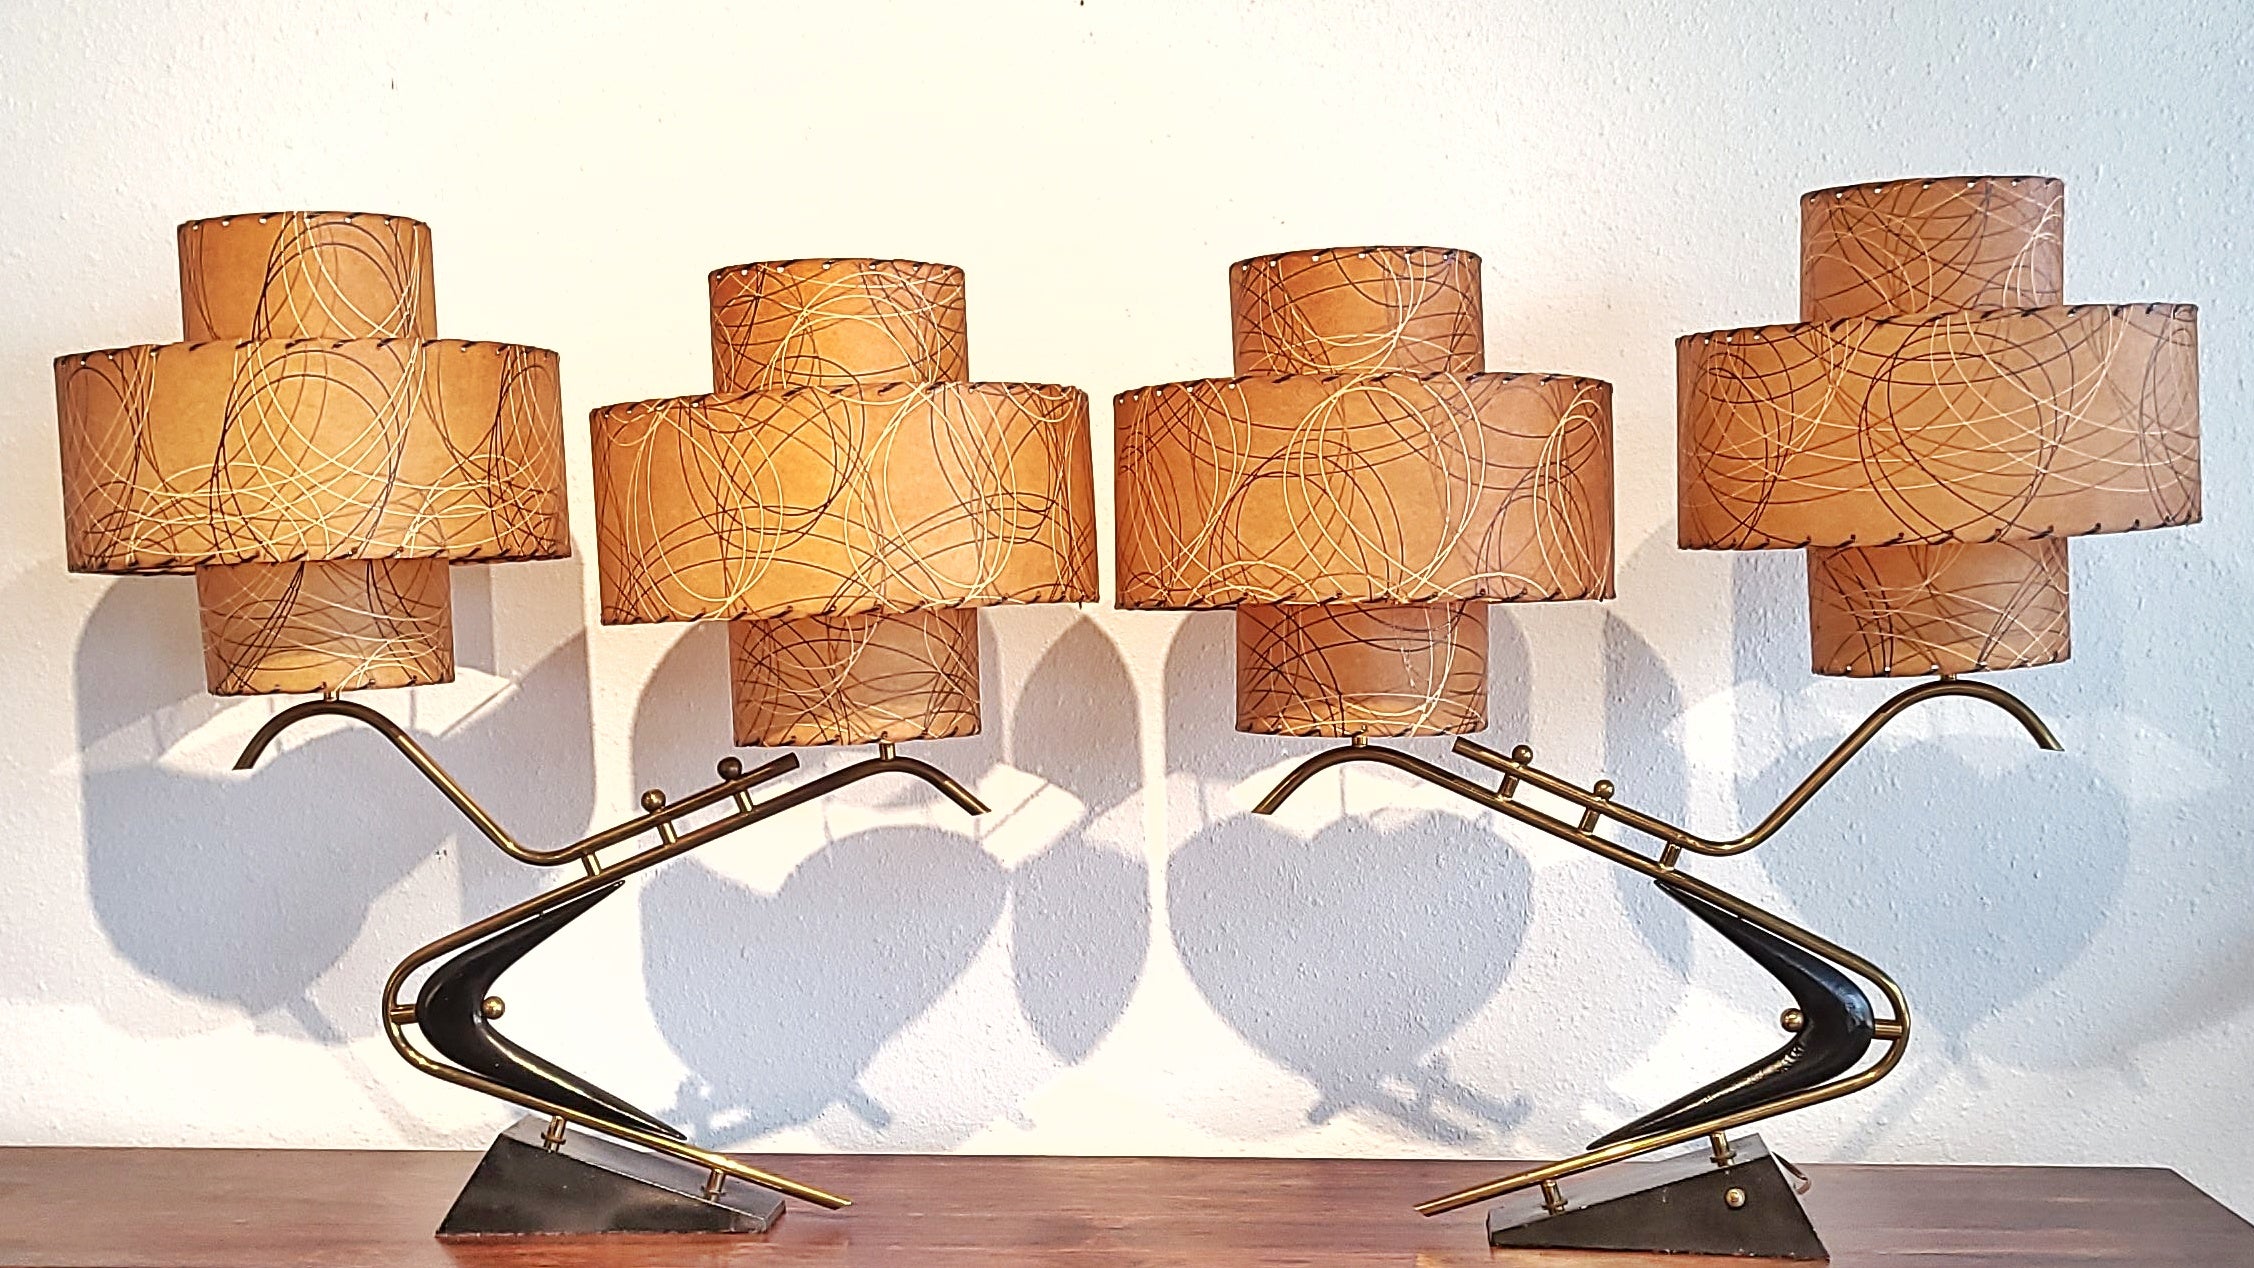 1950s ‘BOOMERANG’ TABLE LAMPS WITH TRIPLE-LEVEL FIBERGLASS SHADES (PAIR)